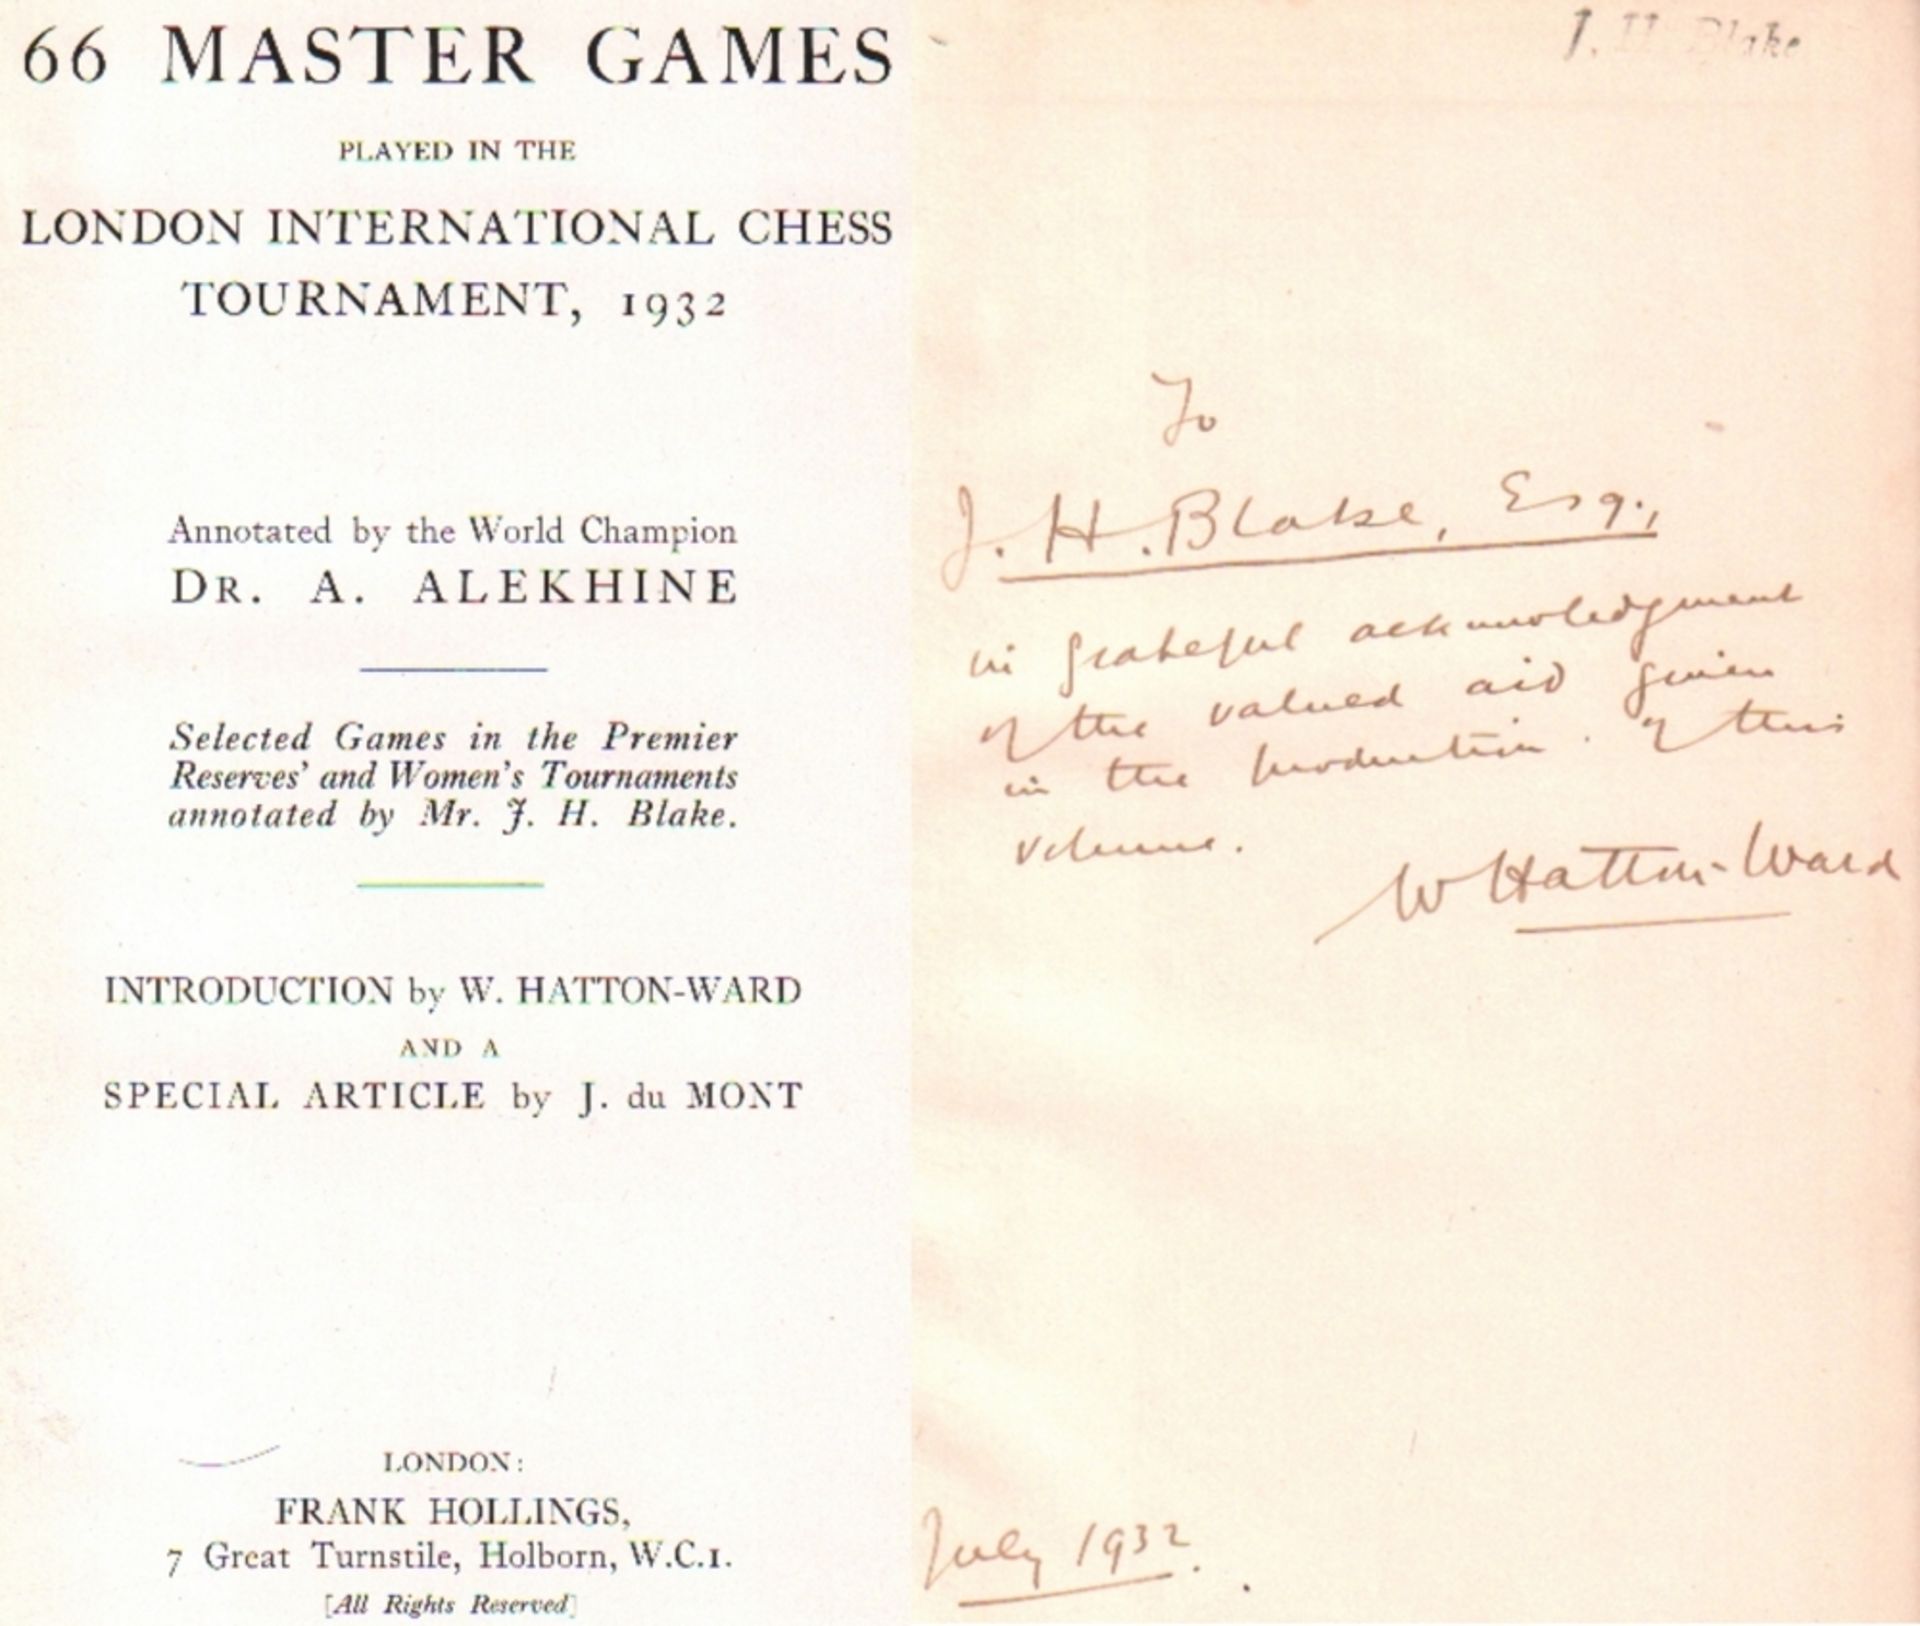 London 1932. 66 master games played in the London International Chess Tournament, 1932. Annotated by